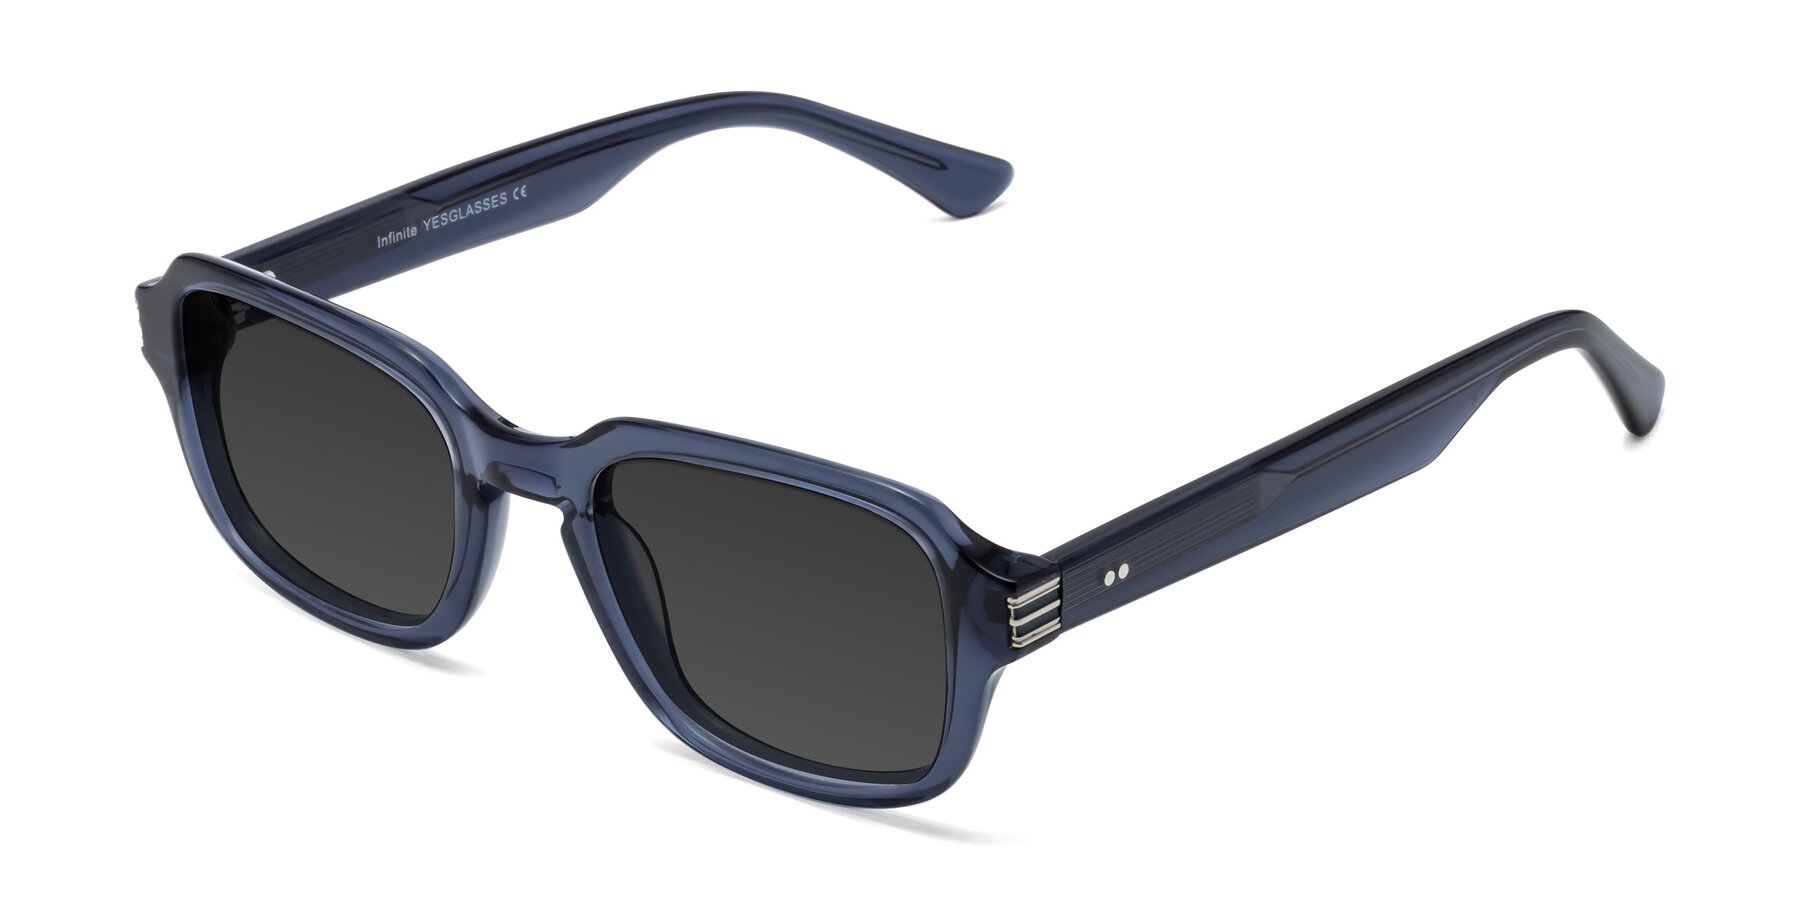 Angle of Infinite in Dark Blue with Gray Tinted Lenses